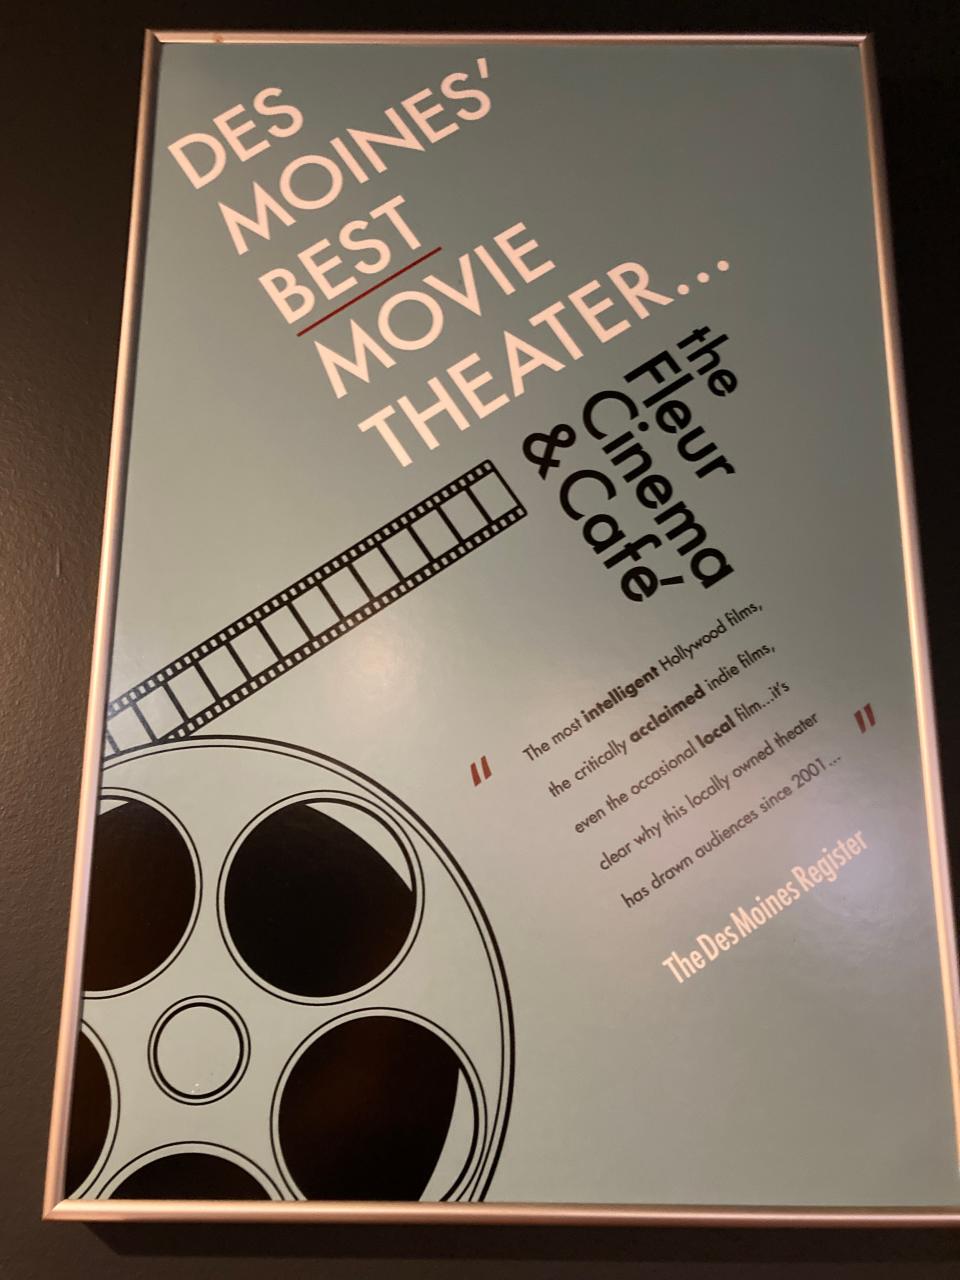 Hanging on the wall at the Fleur Cinema & Café is a laudatory quote from the Des Moines Register.